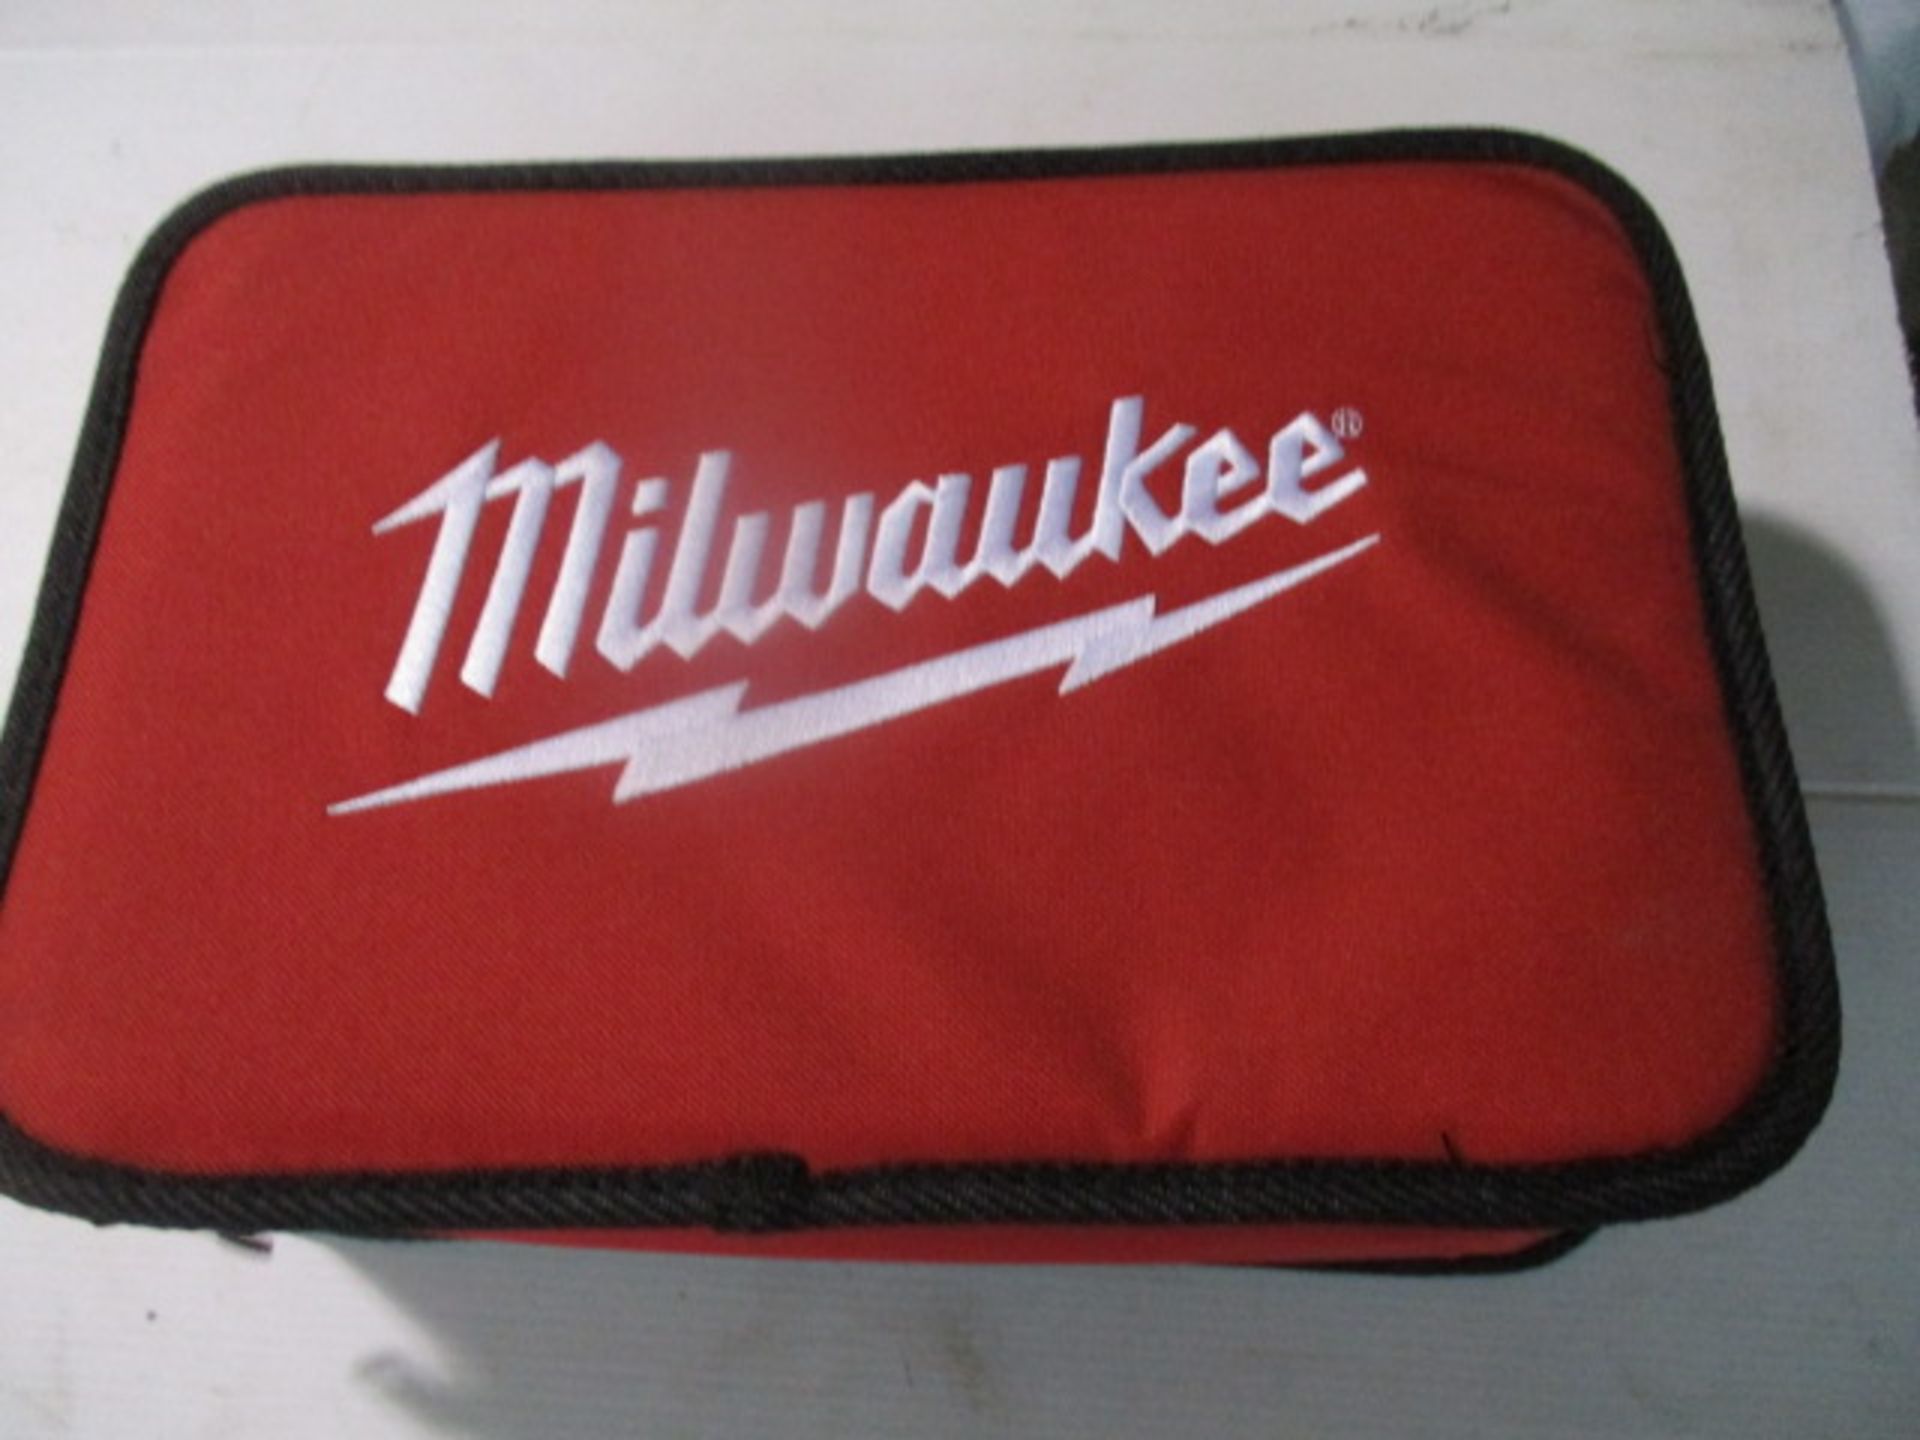 New and sealed Milwaukee carry bag for tools and accessories